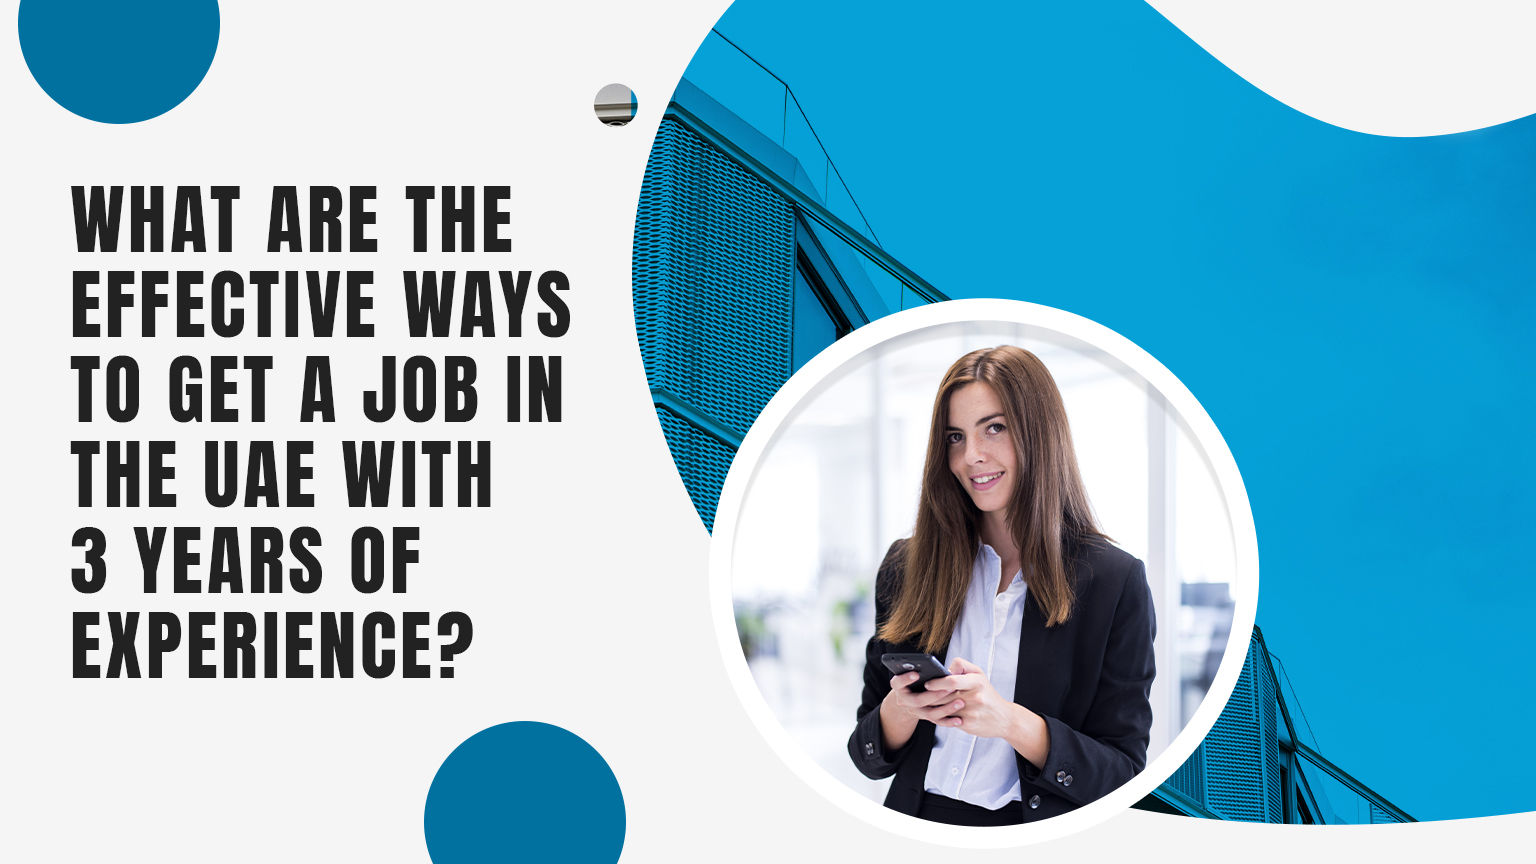 What are the effective ways to get a job in the UAE with 3 years of experience?